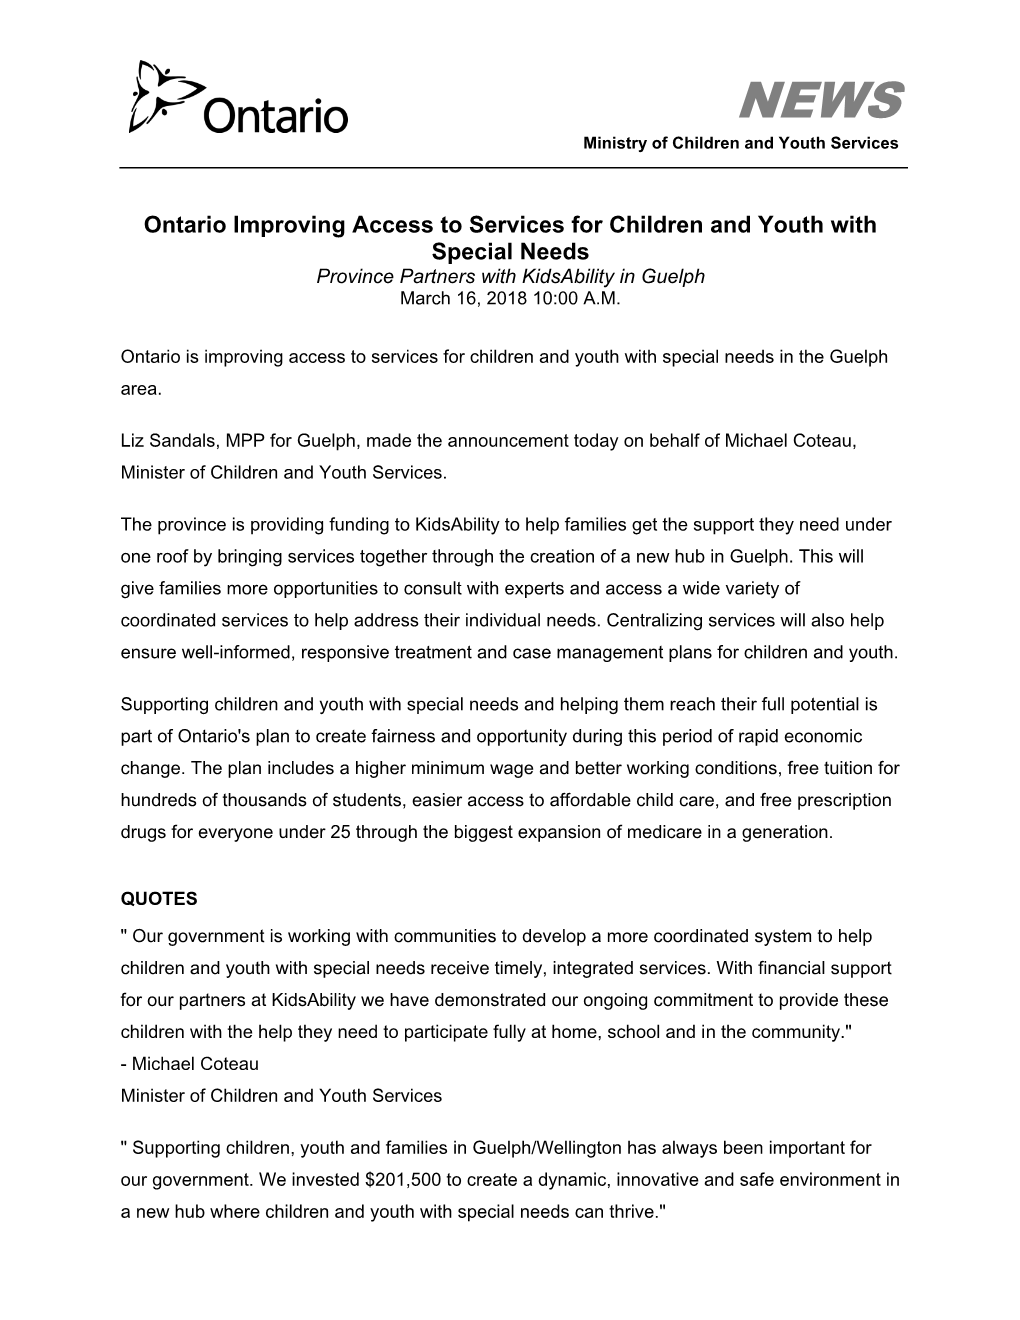 Ontario Improving Access to Services for Children and Youth with Special Needs Province Partners with Kidsability in Guelph March 16, 2018 10:00 A.M